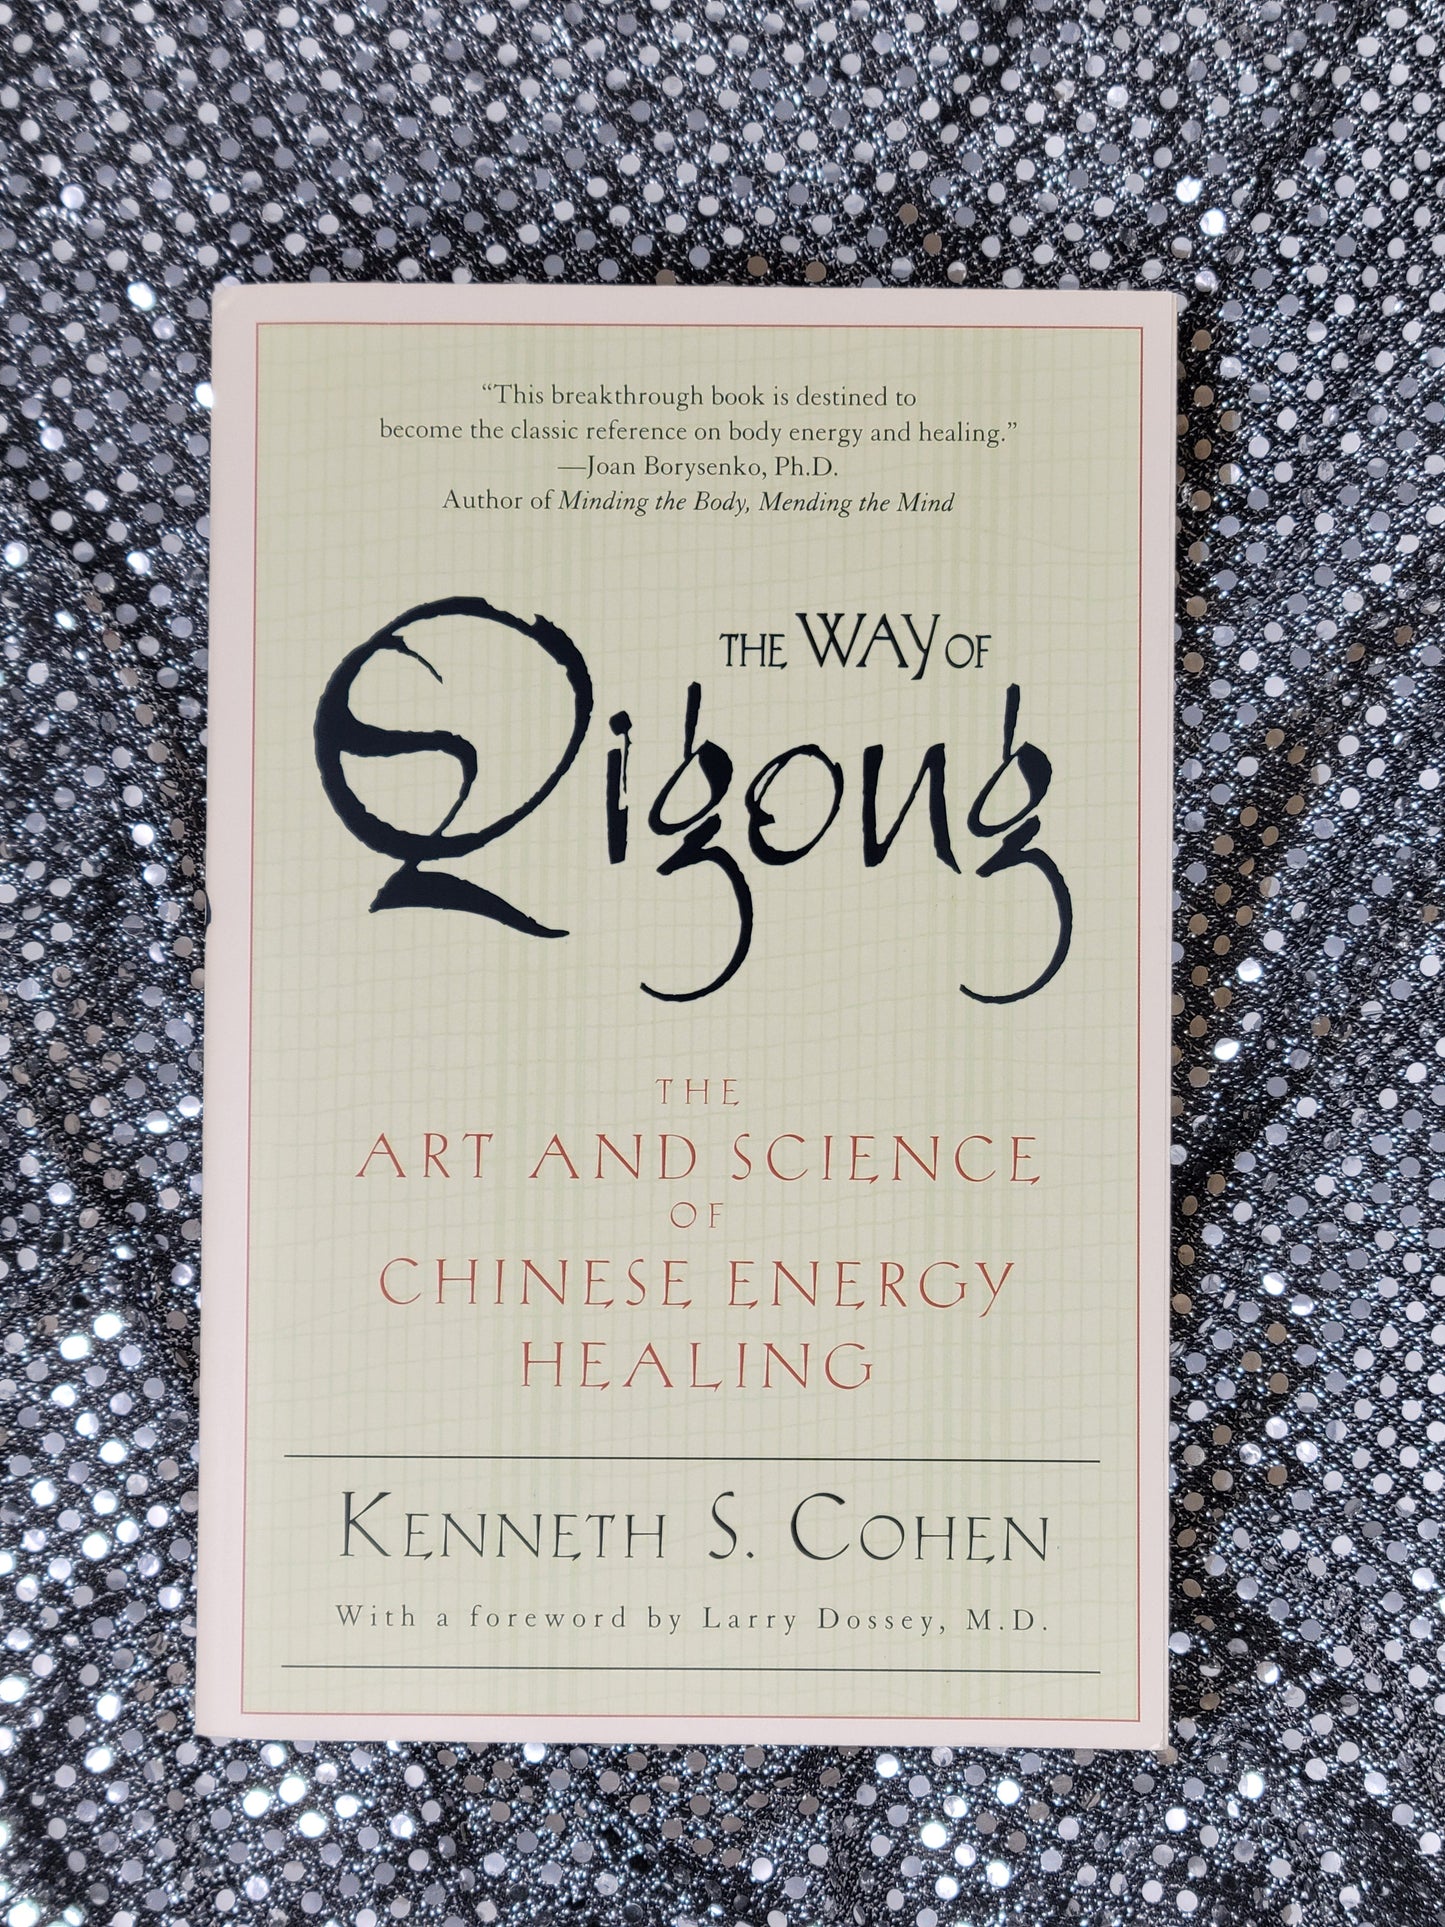 The Way of Qigong THE ART AND SCIENCE OF CHINESE ENERGY HEALING By Kenneth S. Cohen